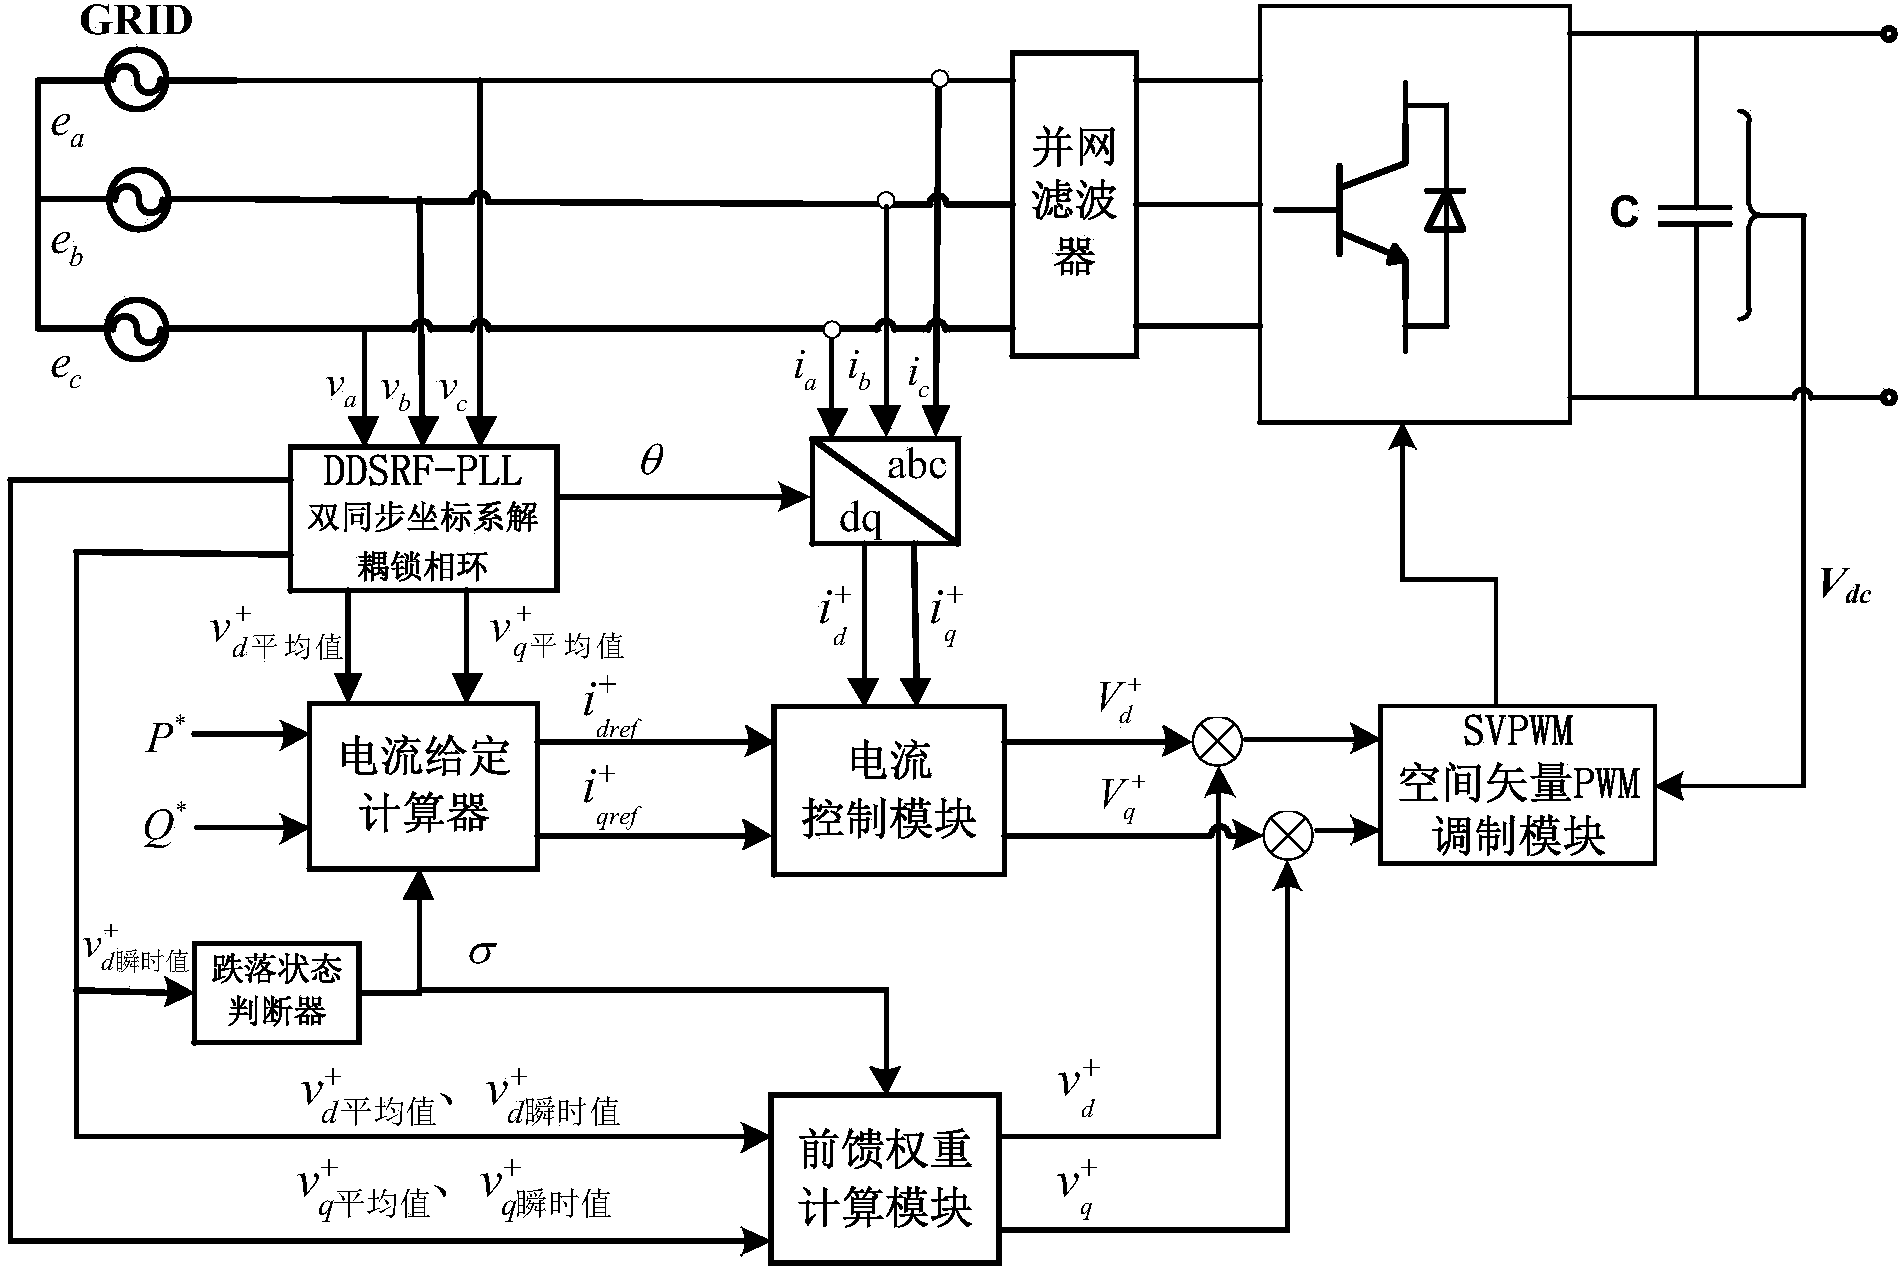 Low-voltage ride-through control method for grid-connected inverter